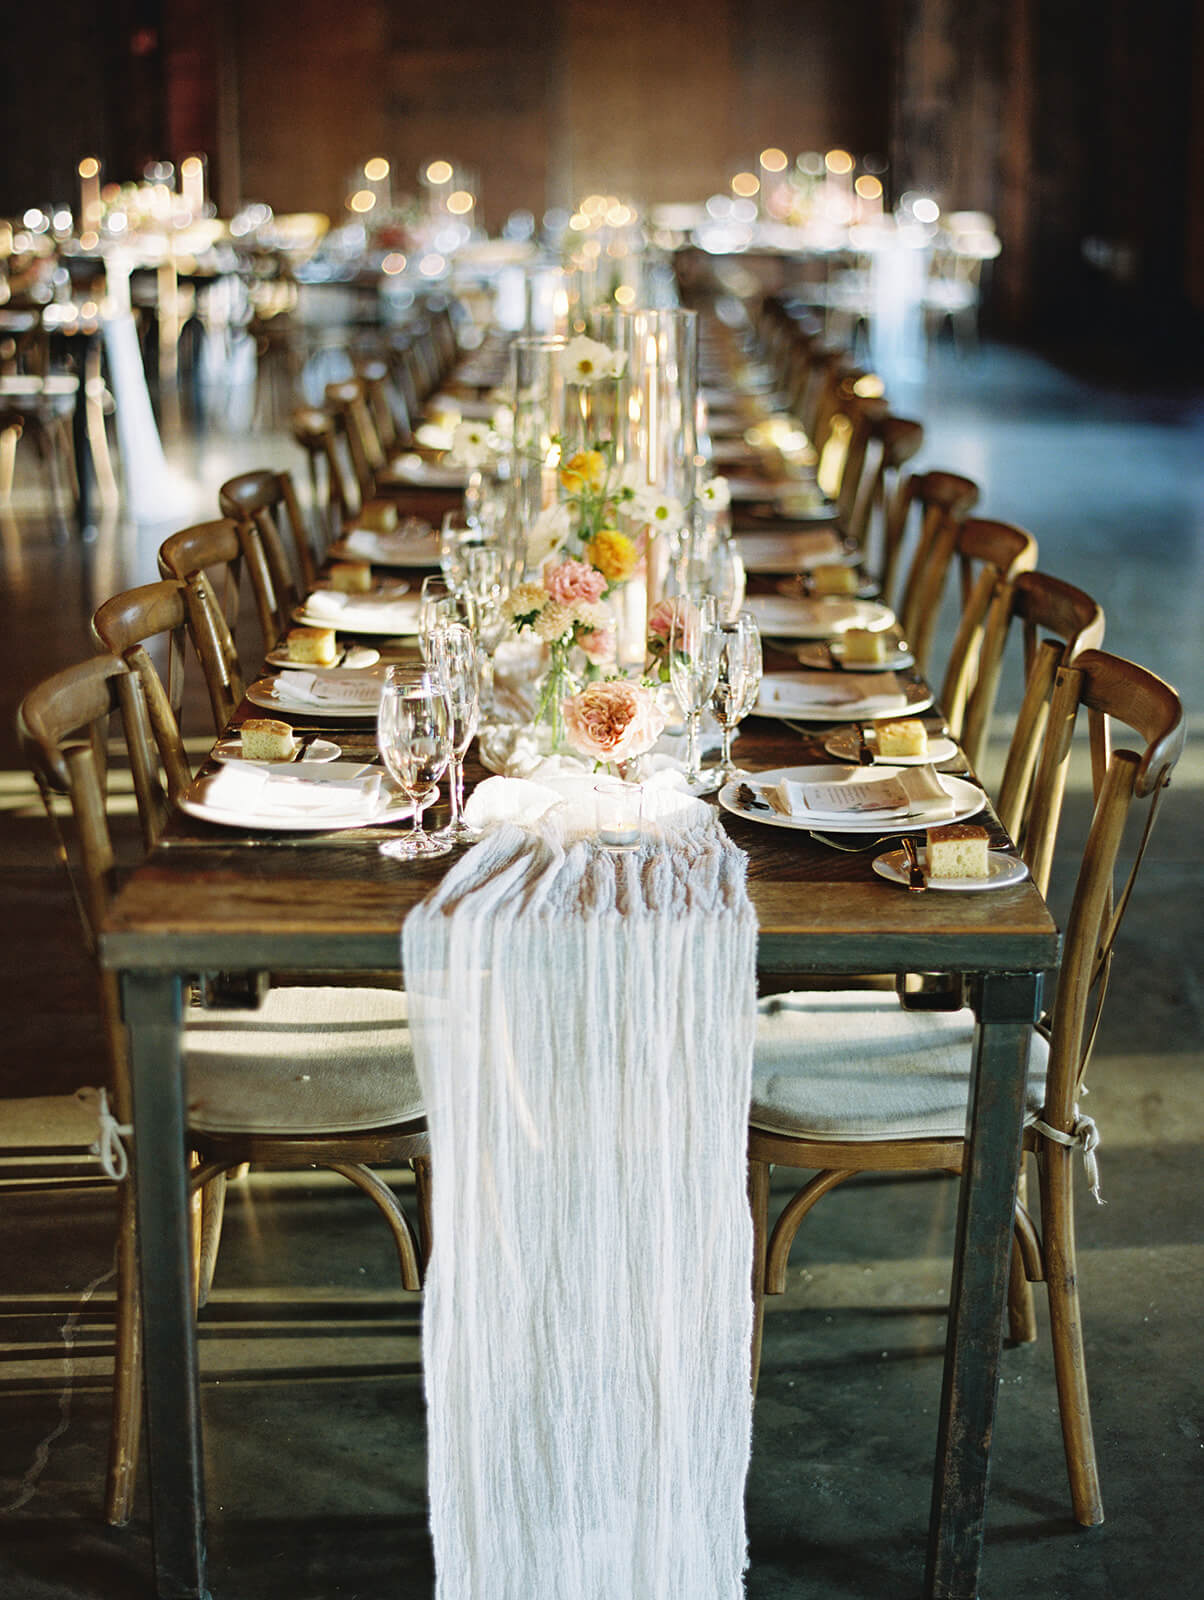 A long table with a linen and flowers